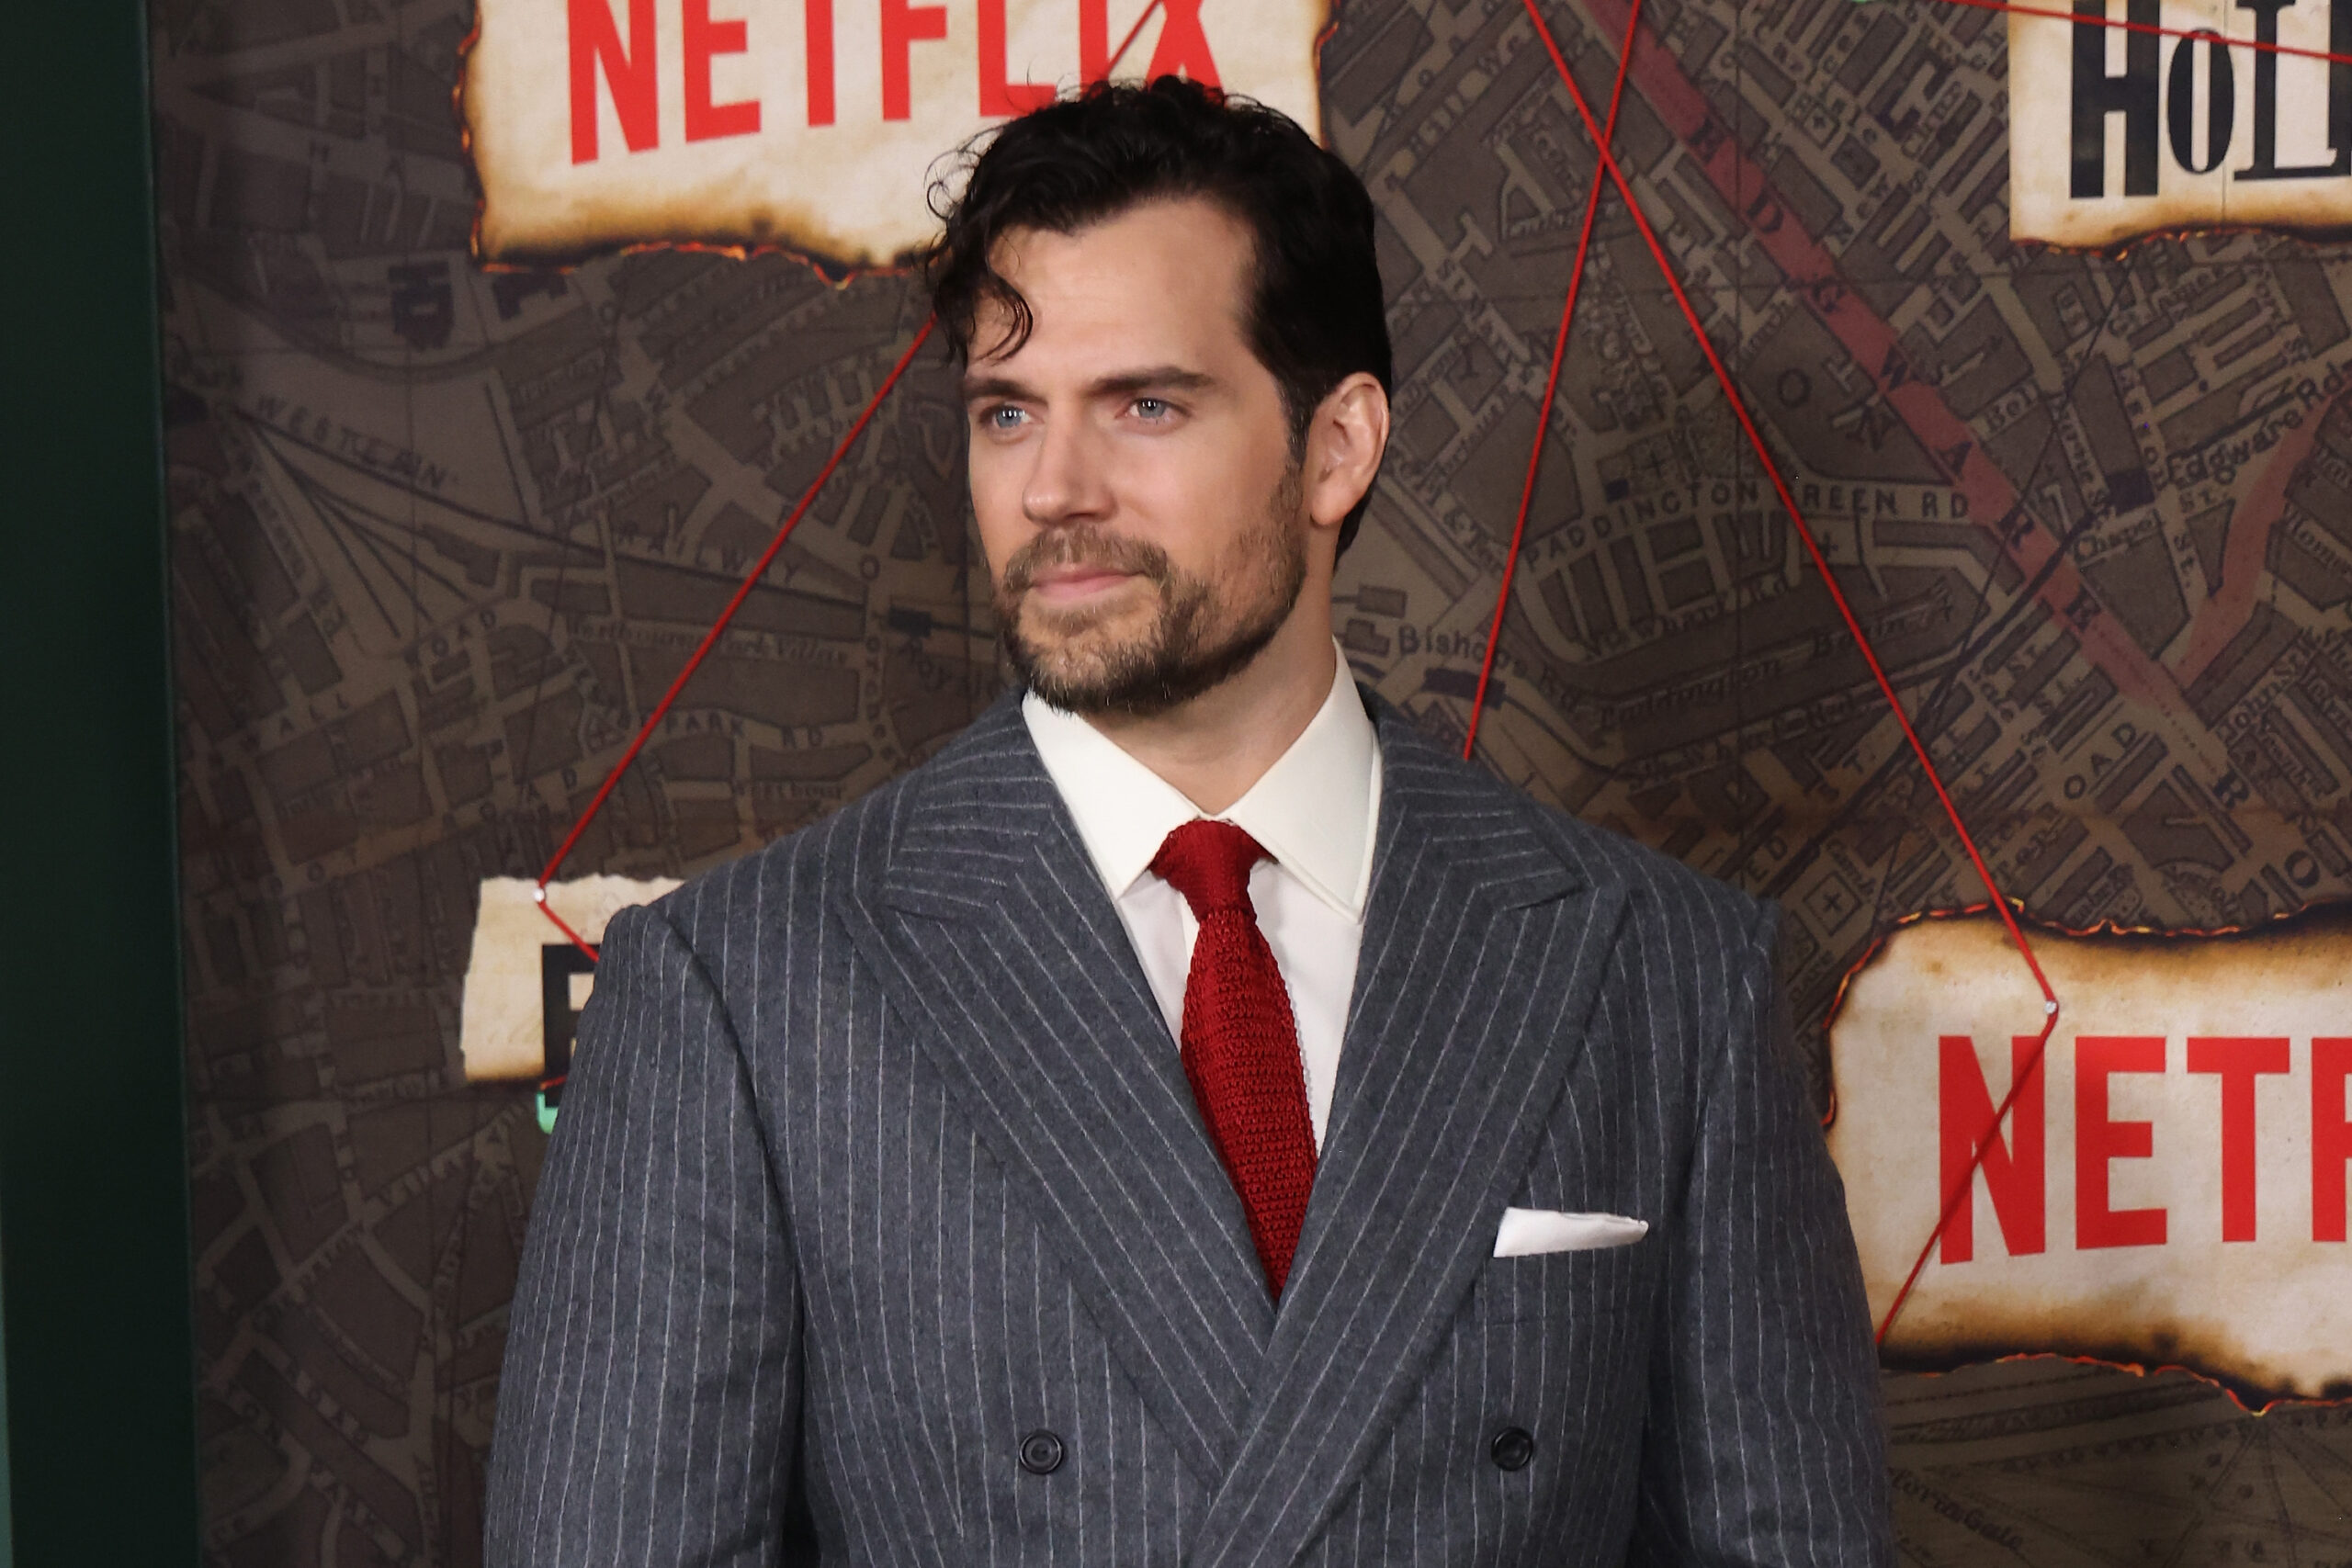 From Geralt to Gunslinger: Henry Cavill's Dream Role in Red Dead Redemption Revealed